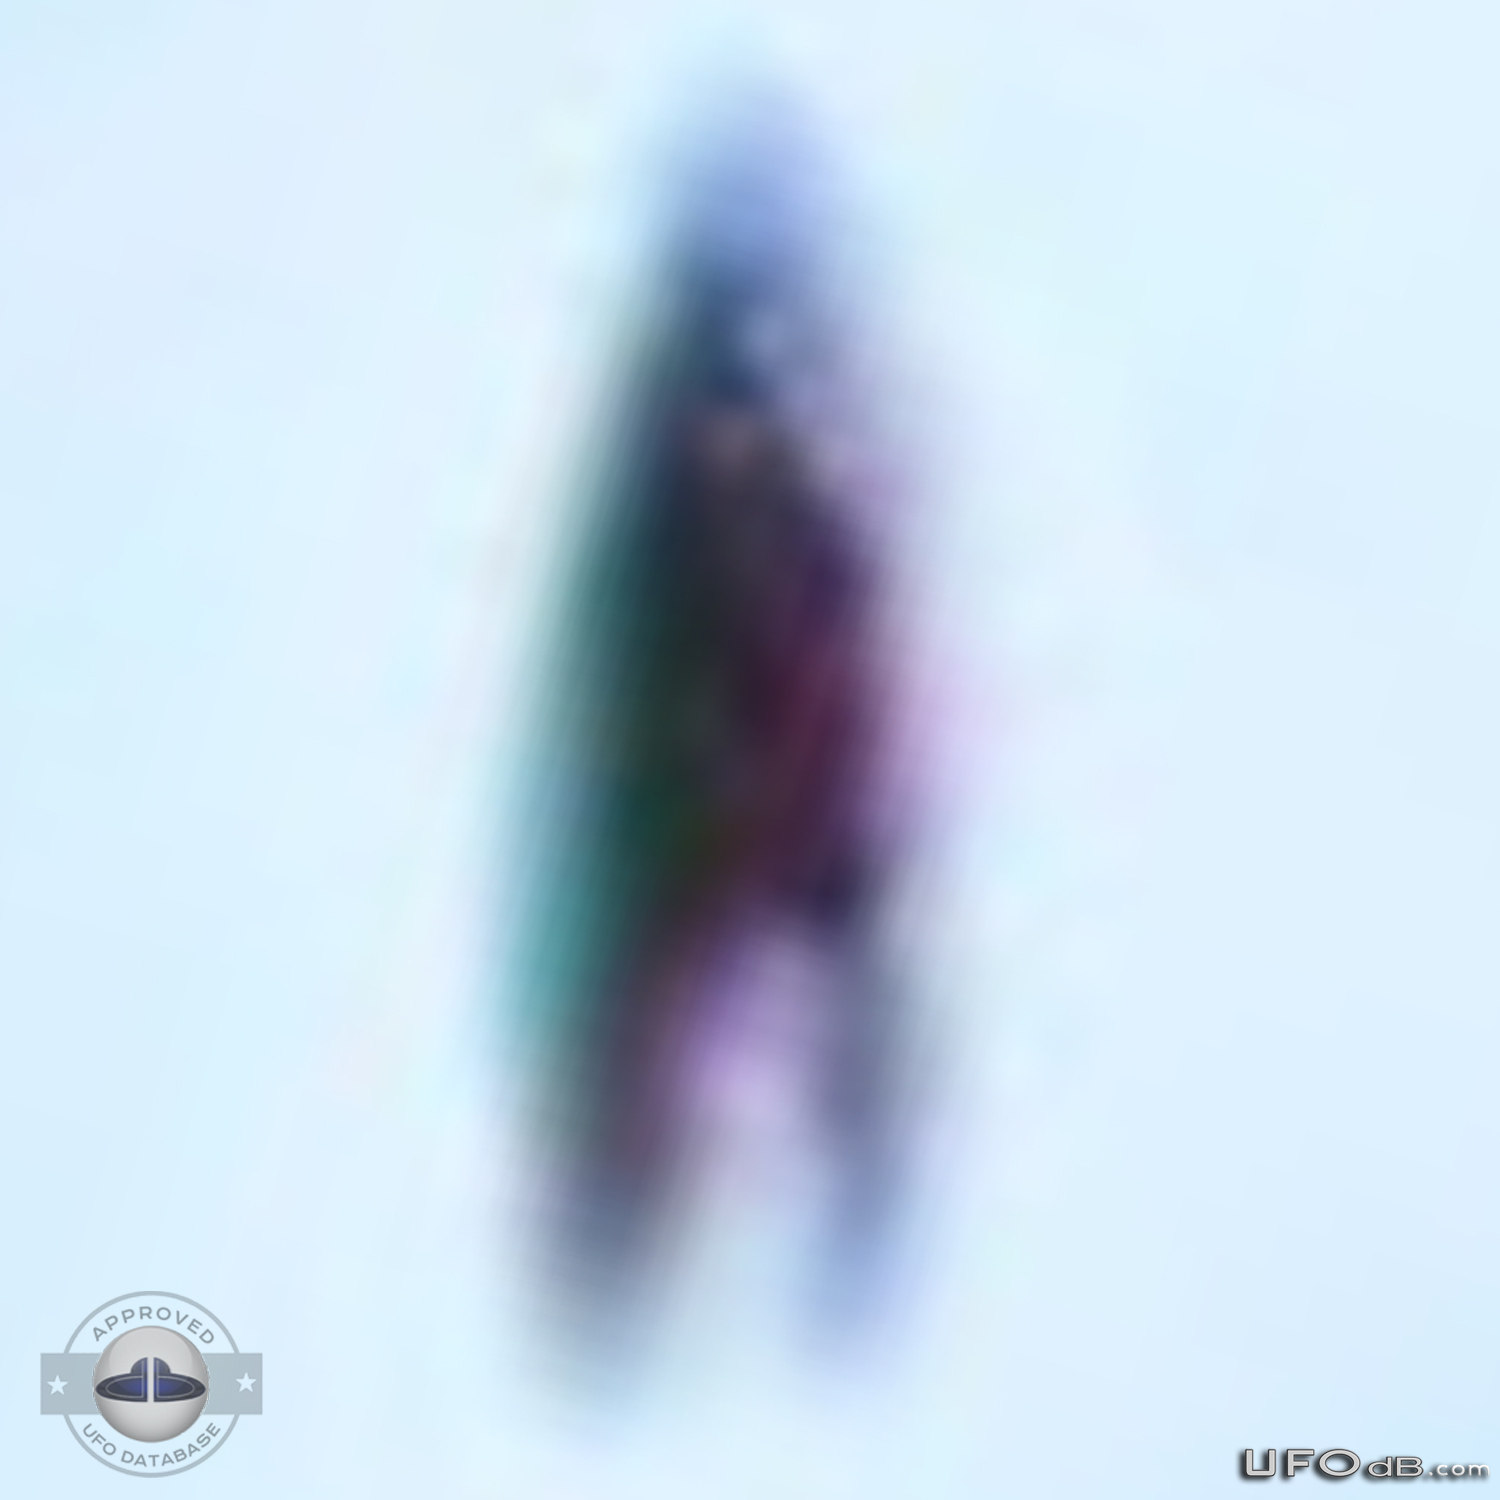 Black Boomerang UFO in the Mountains in Cali, Colombia | January 2011 UFO Picture #245-6